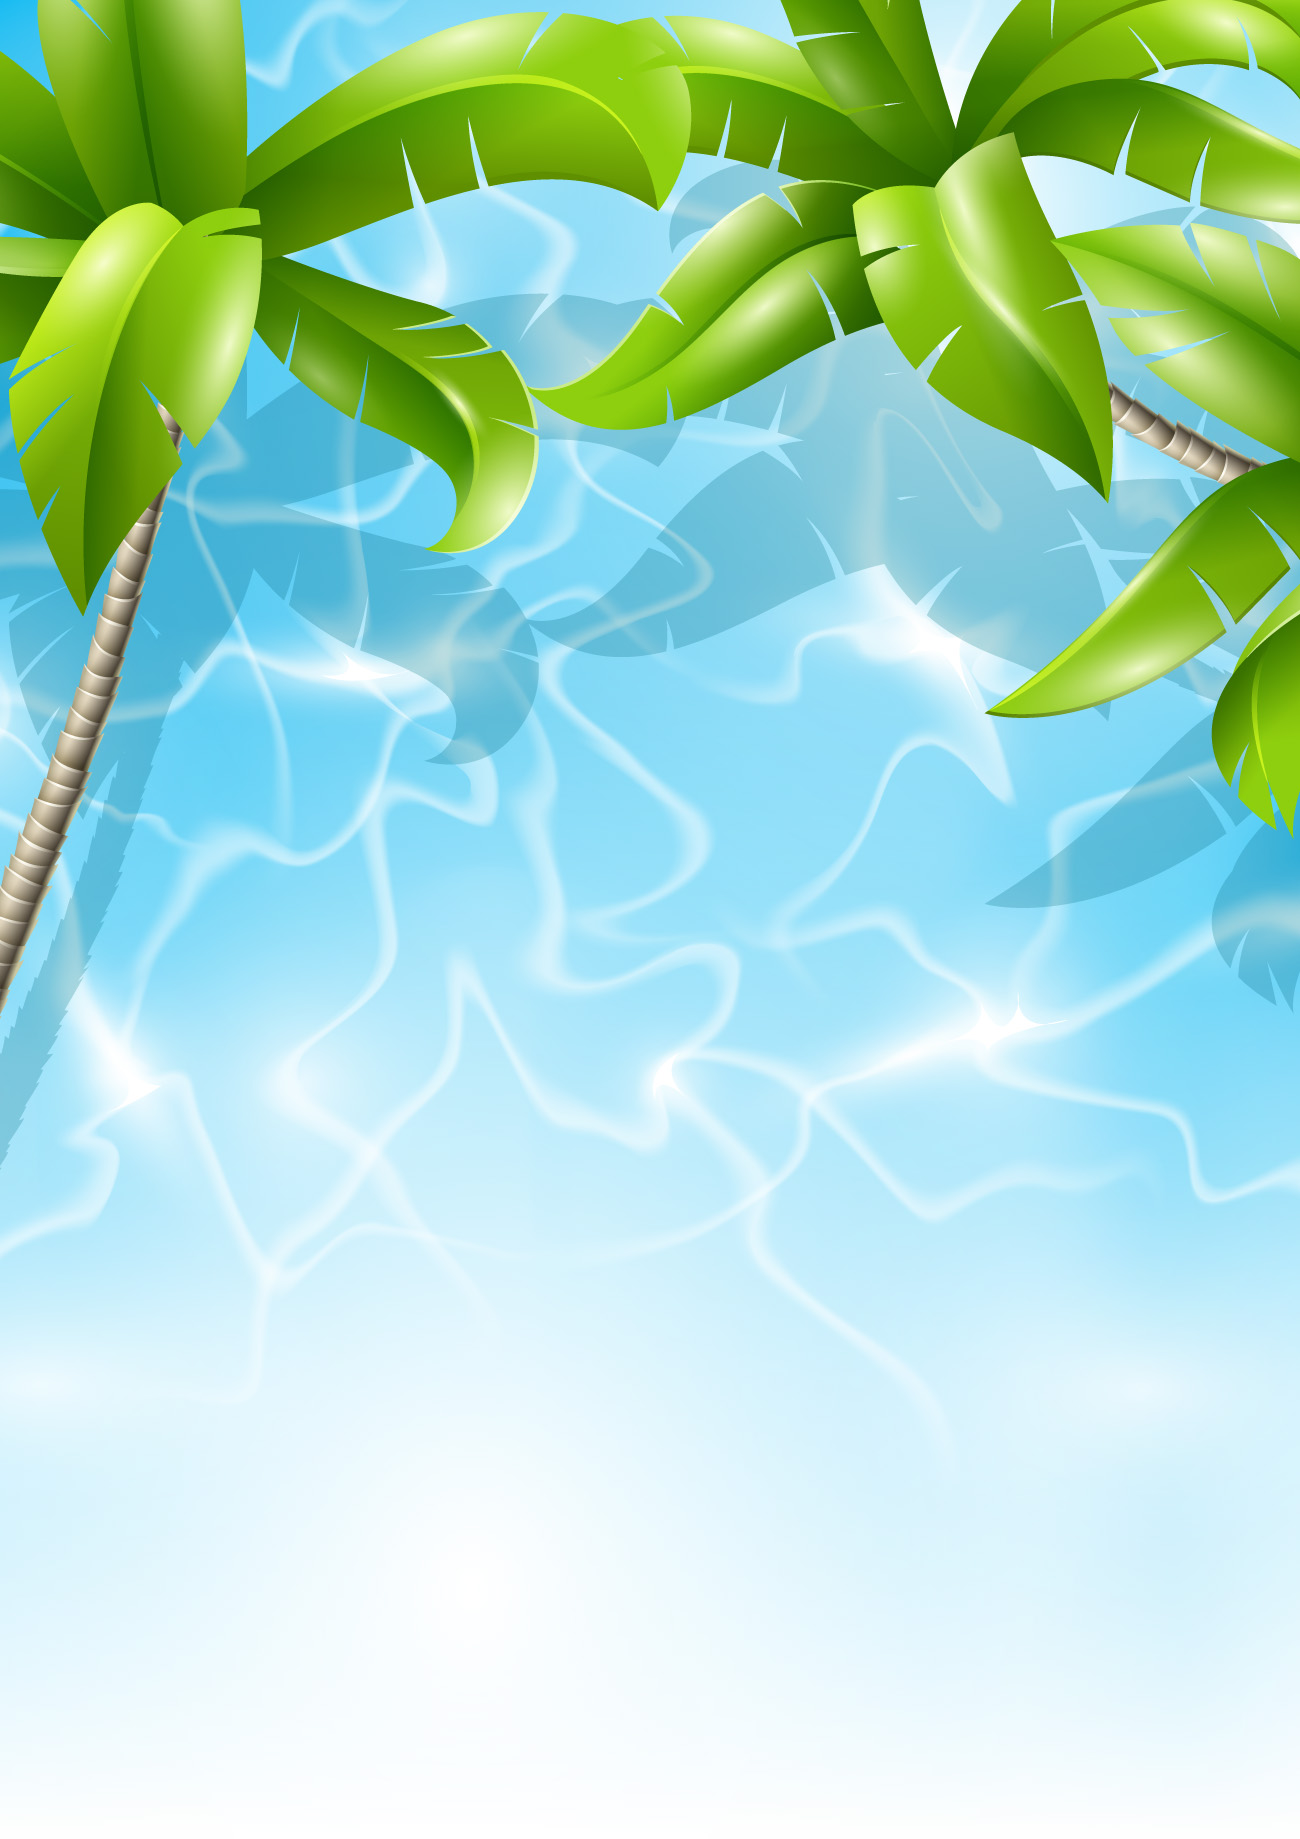 Beautiful Tropical Backgrounds vector 01